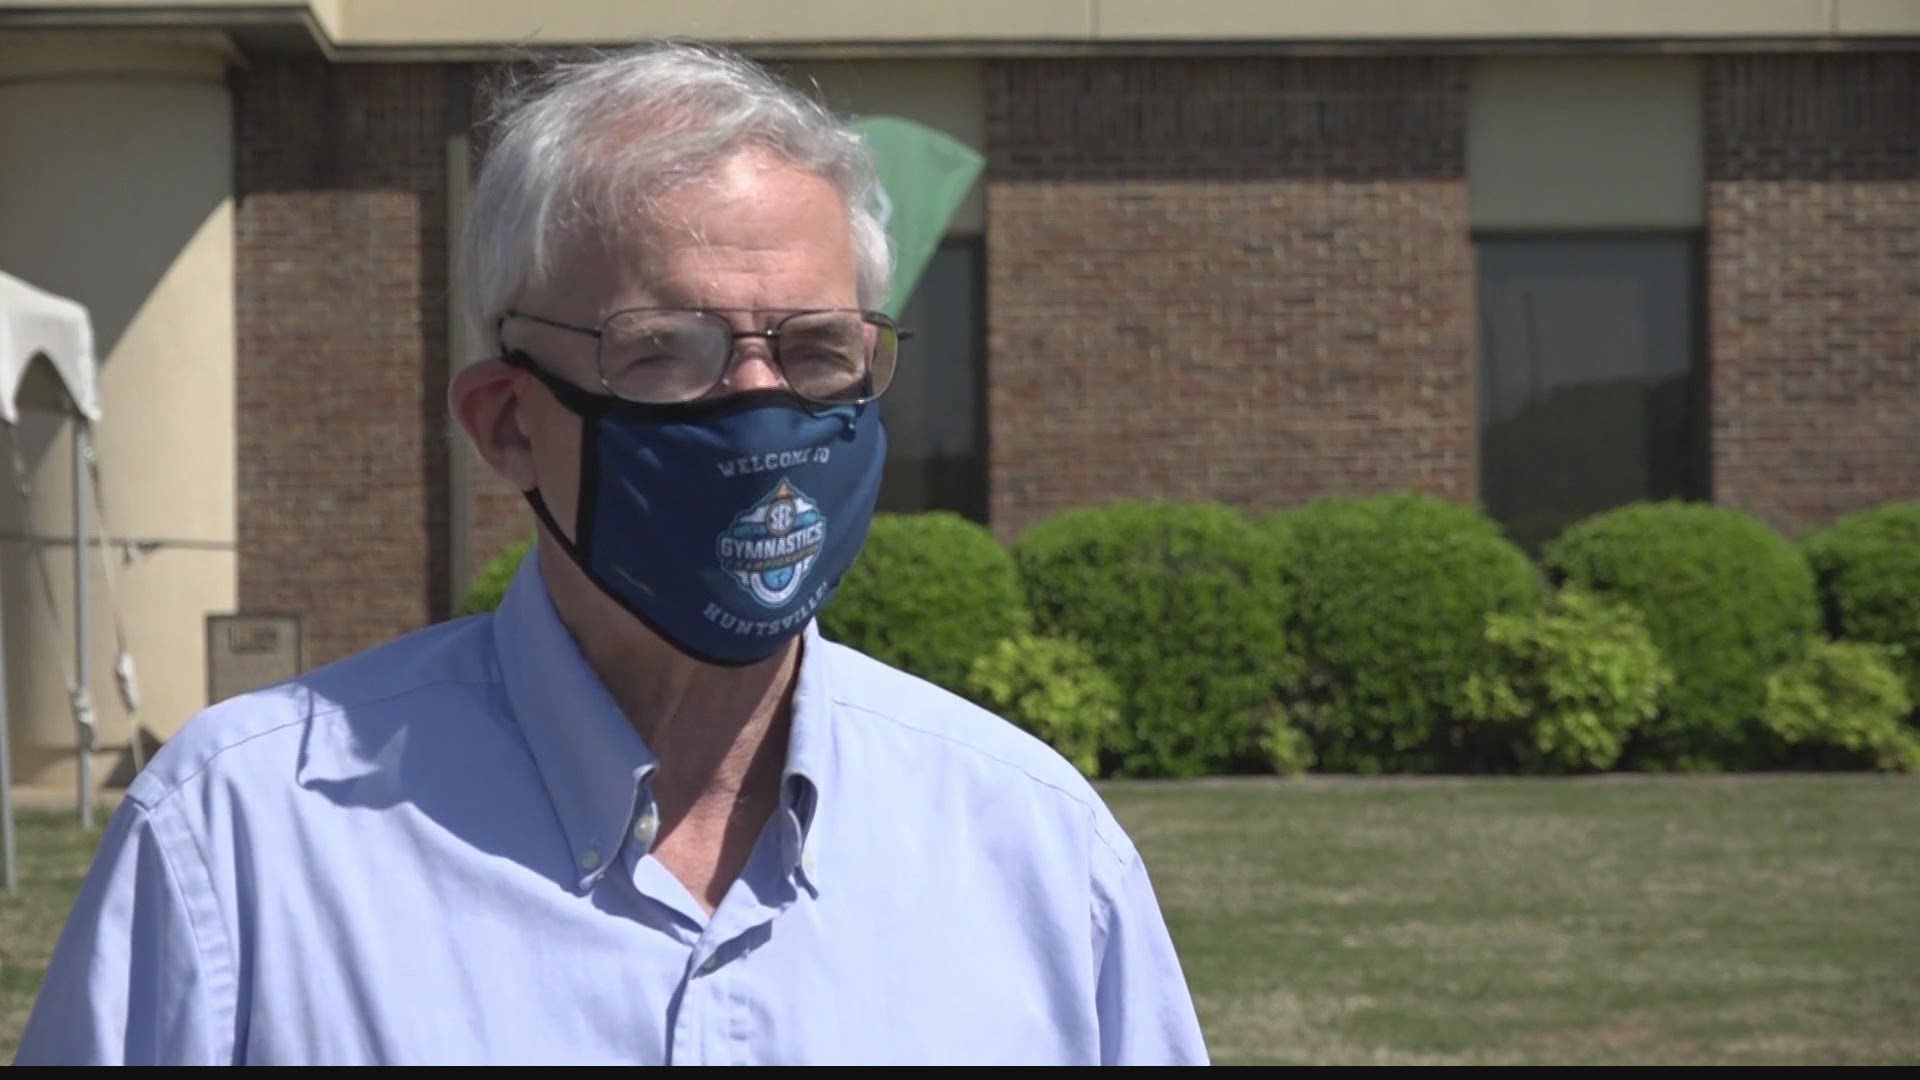 Huntsville Councilman Bill Kling received his first dose today alongside encouraging the community to get vaccinated.